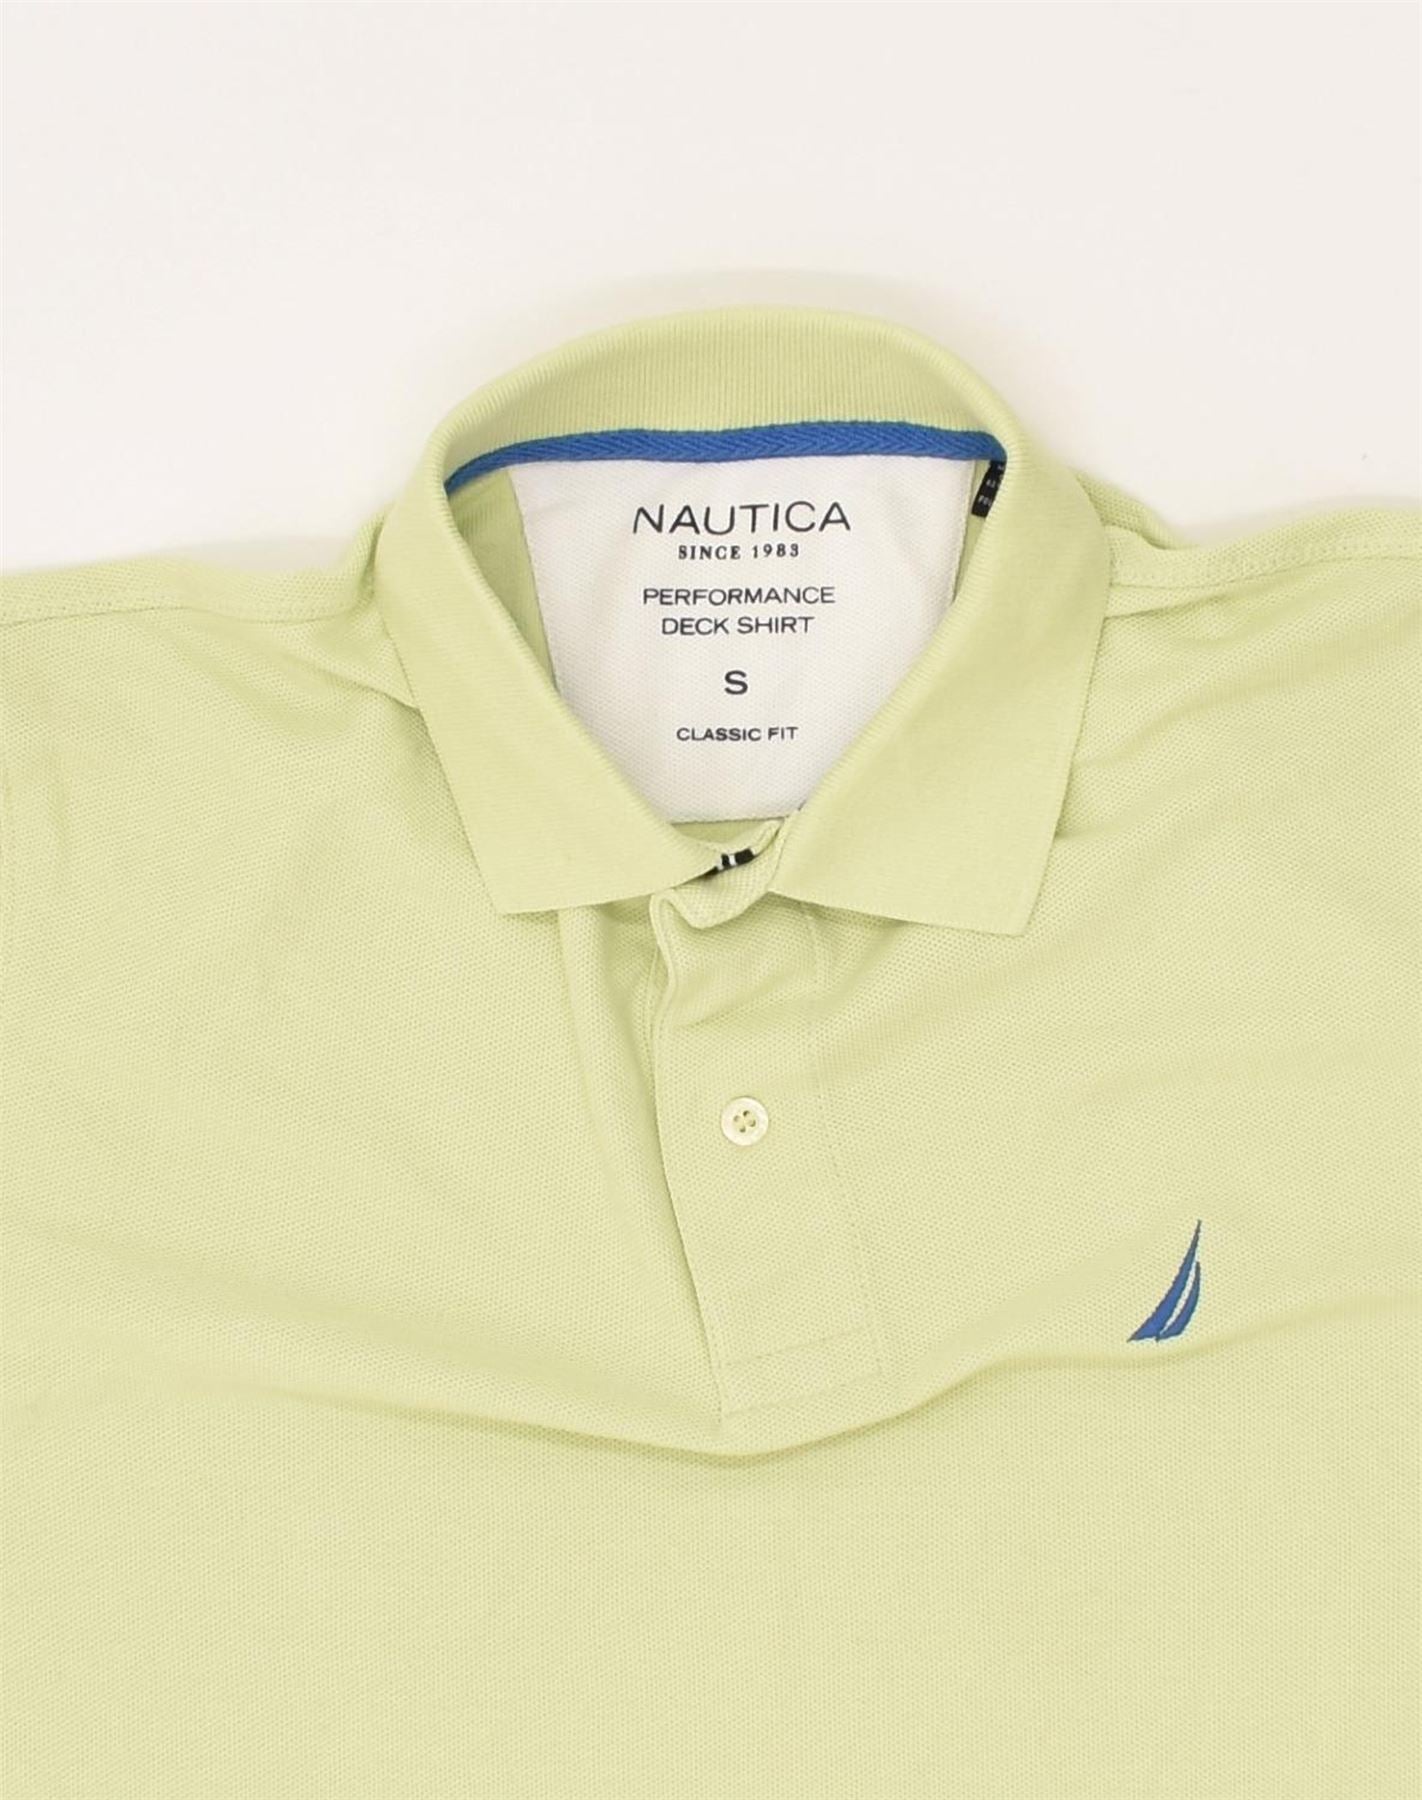 NAUTICA Mens Performance Classic Fit Polo Shirt Small Green Cotton, Vintage & Second-Hand Clothing Online